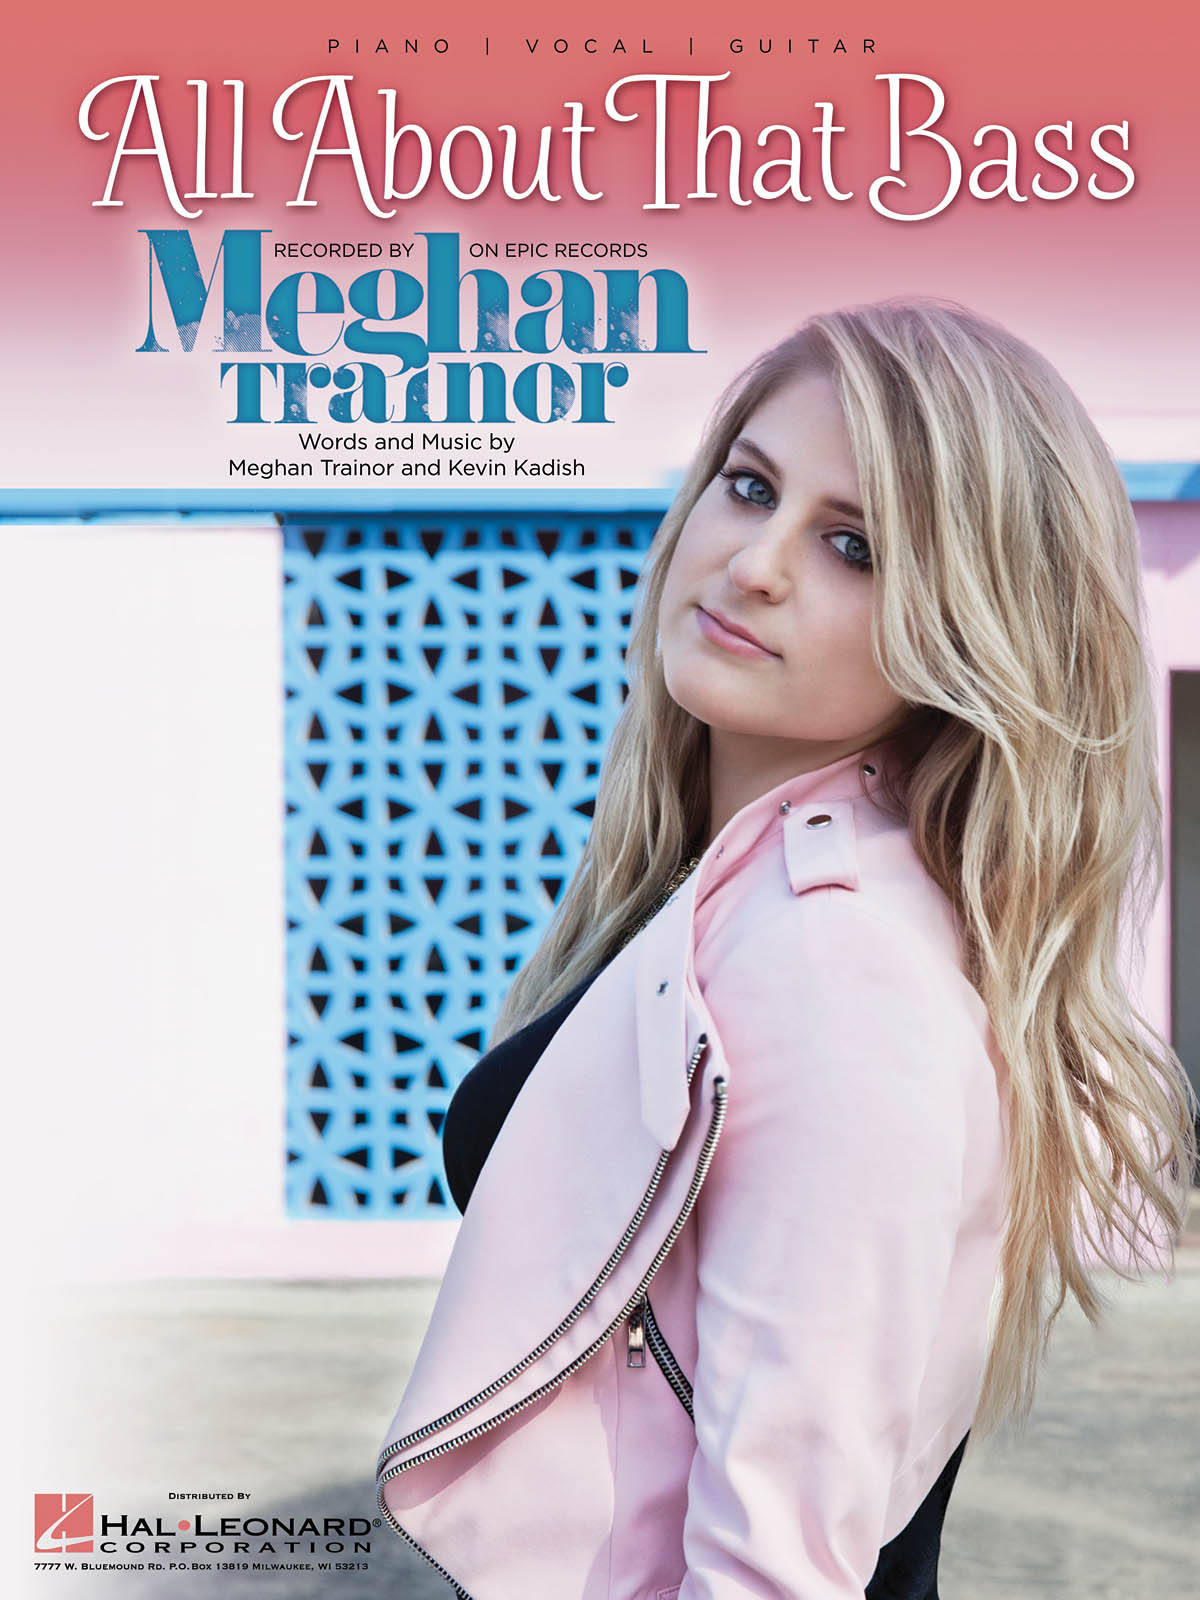 Meghan Trainor: All About That Bass: Piano  Vocal and Guitar: Single Sheet